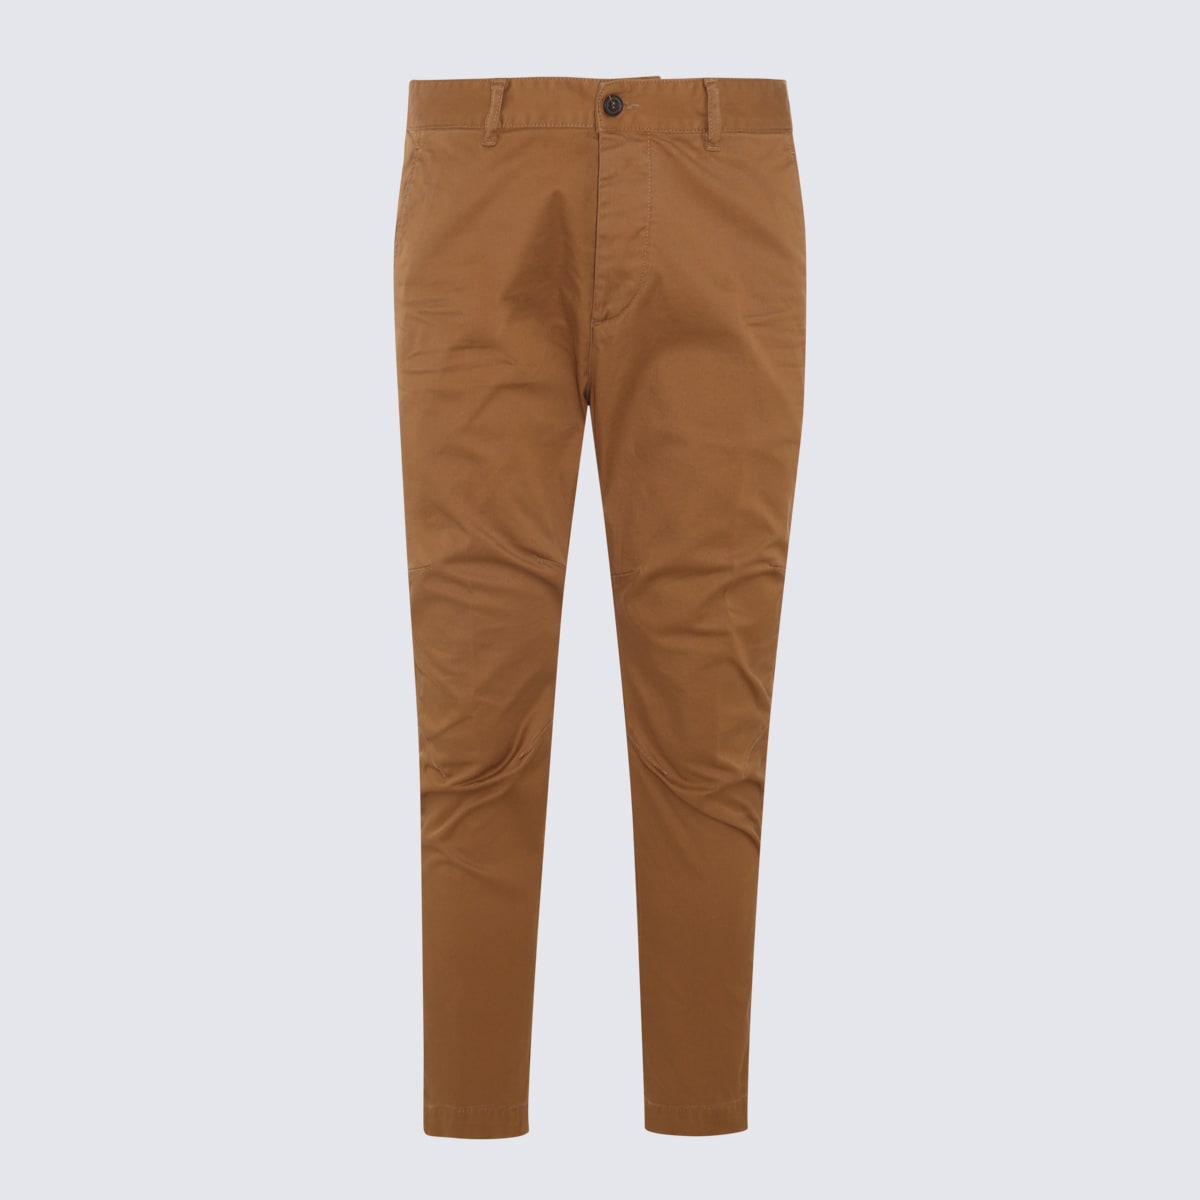 DSQUARED2 BROWN COTTON BLEND TROUSERS